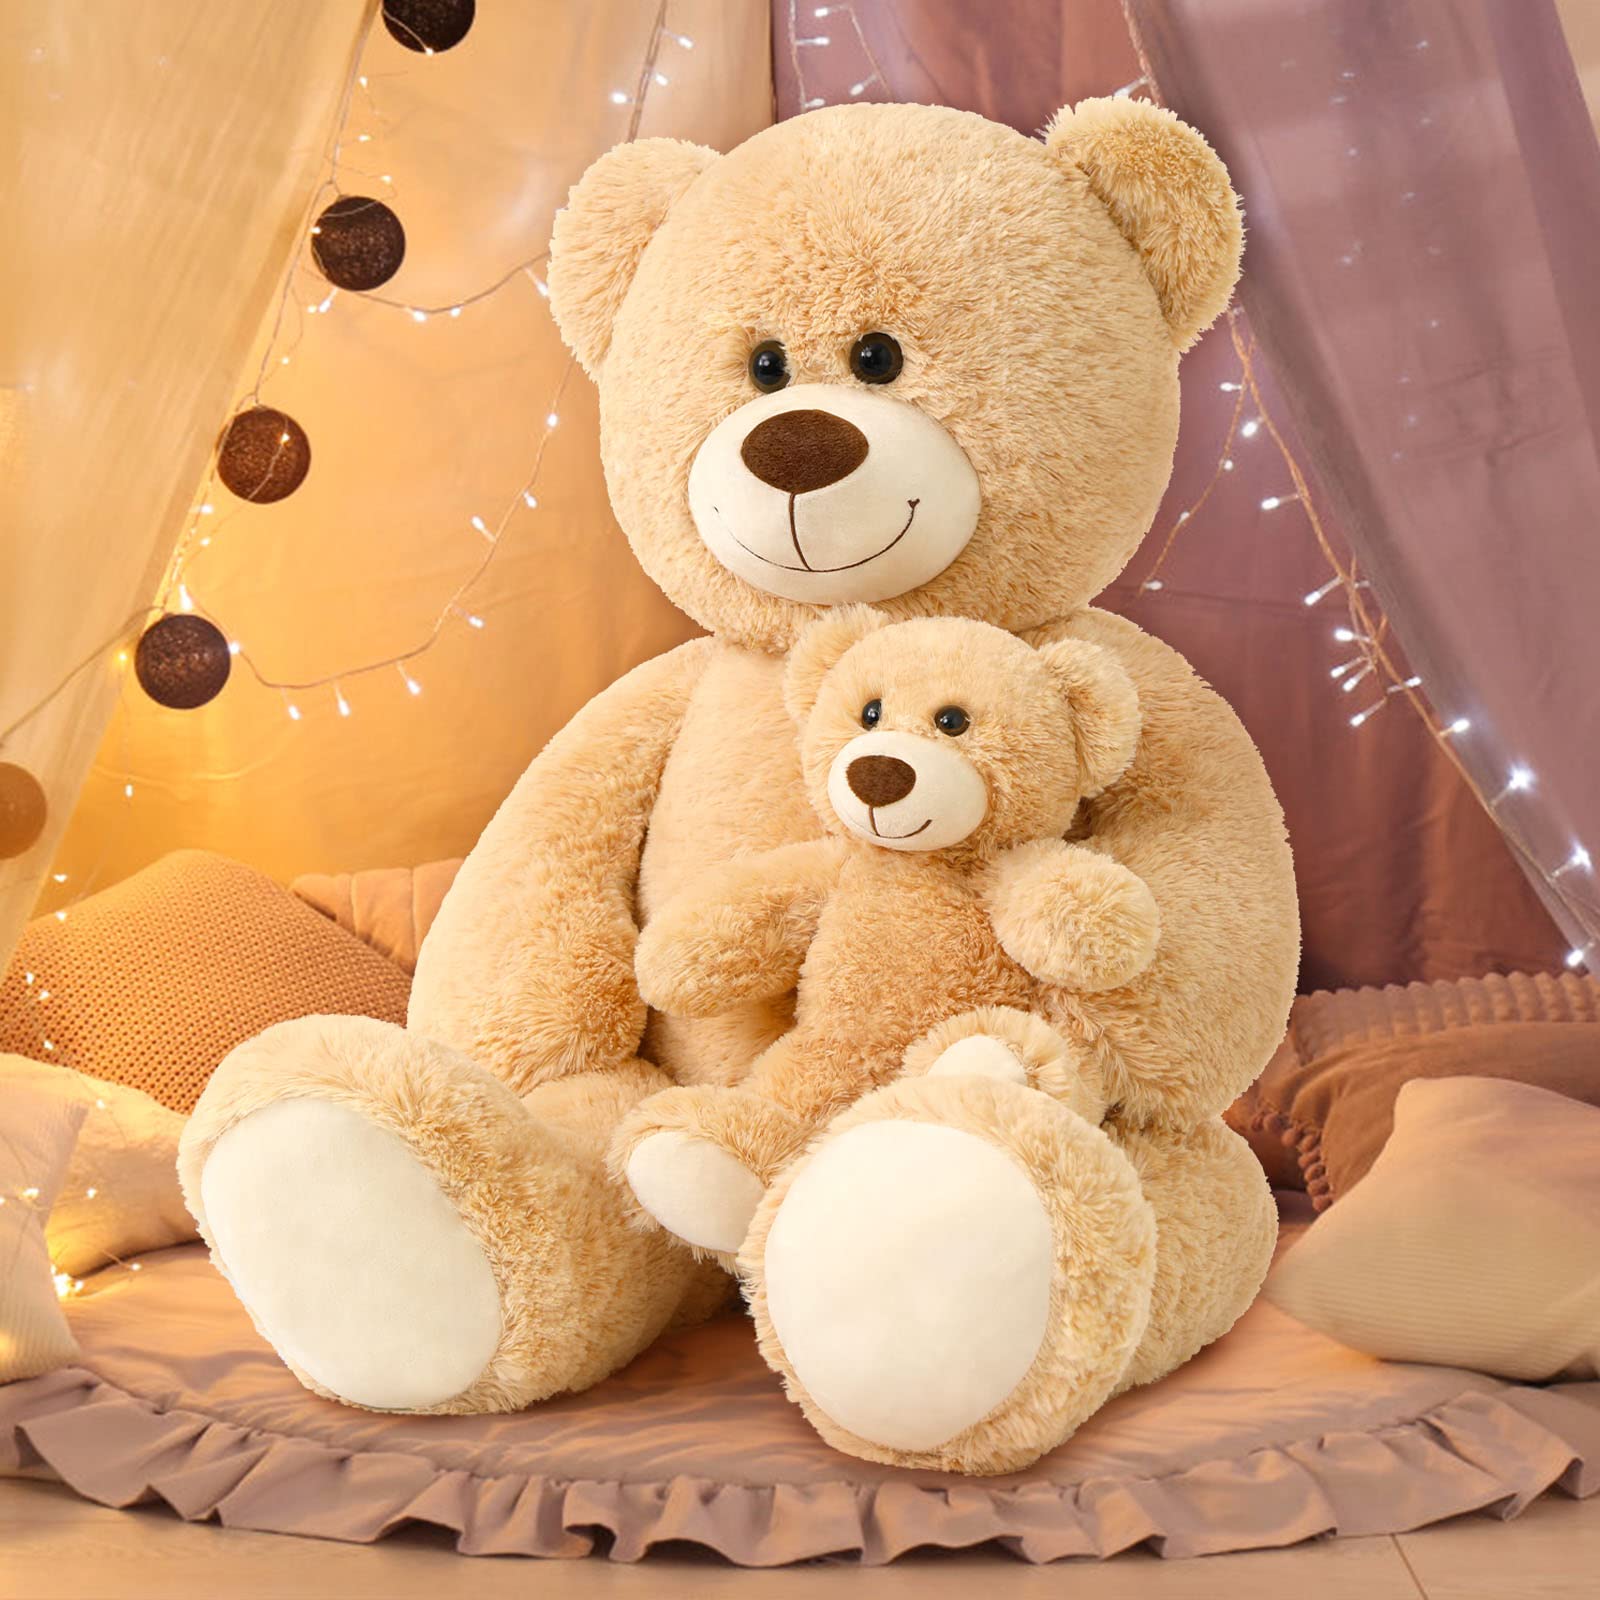 Muiteiur Giant Teddy Bear Stuffed Animal Cute Mommy and Baby Bear Teddy Bear Baby Shower Plush Toy for Kids Boys Girls Great Gift for Christmas Valentines Day Party Decorations 40inch,Light Brown